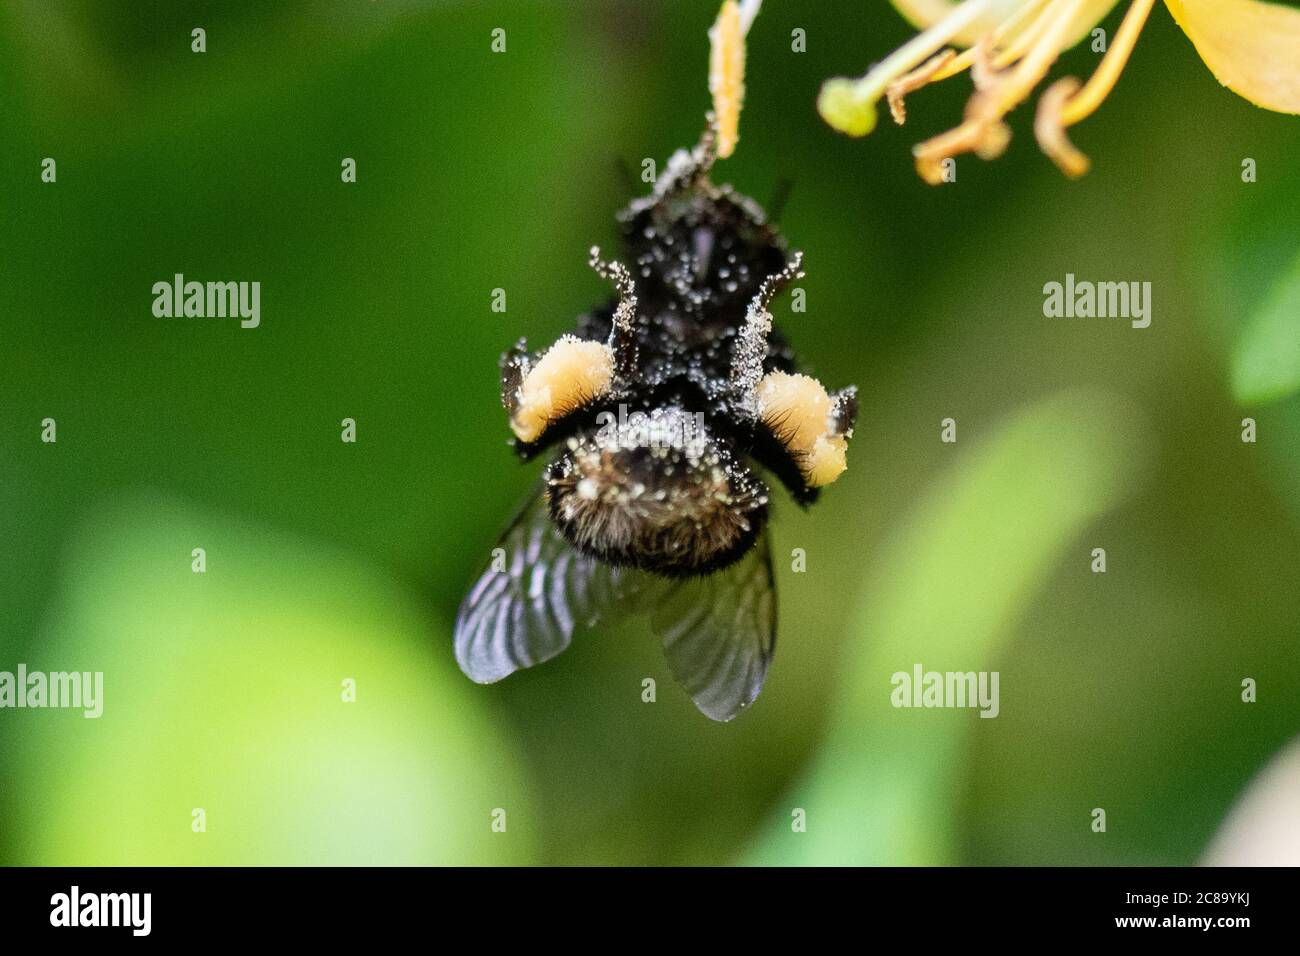 closeup of pollen baskets on a bumblebee dangling from honeysuckle flower as it gathers pollen into the sacs from the hairs on its body - UK Stock Photo